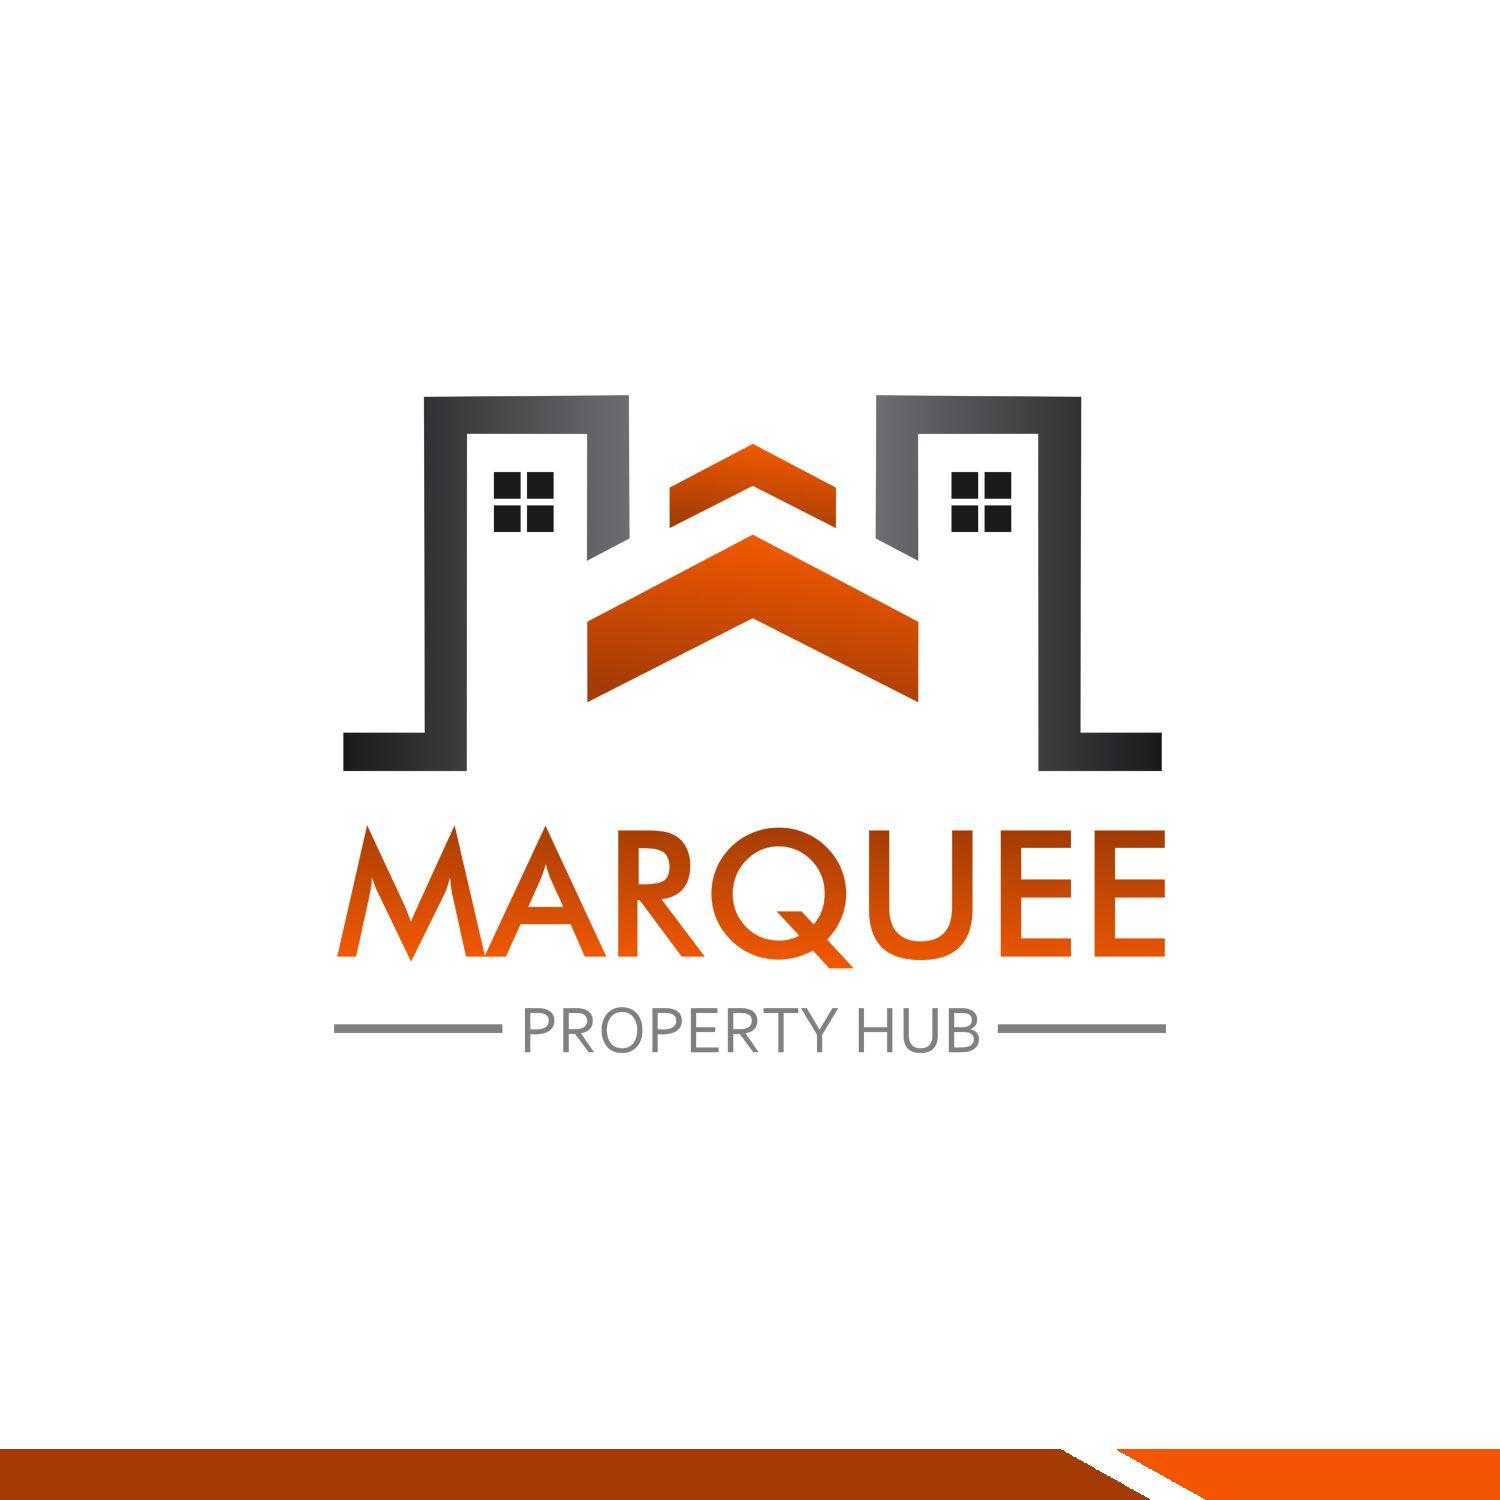 Marquee Logo - Elegant, Playful, Business Logo Design for MARQUEE Property Hub